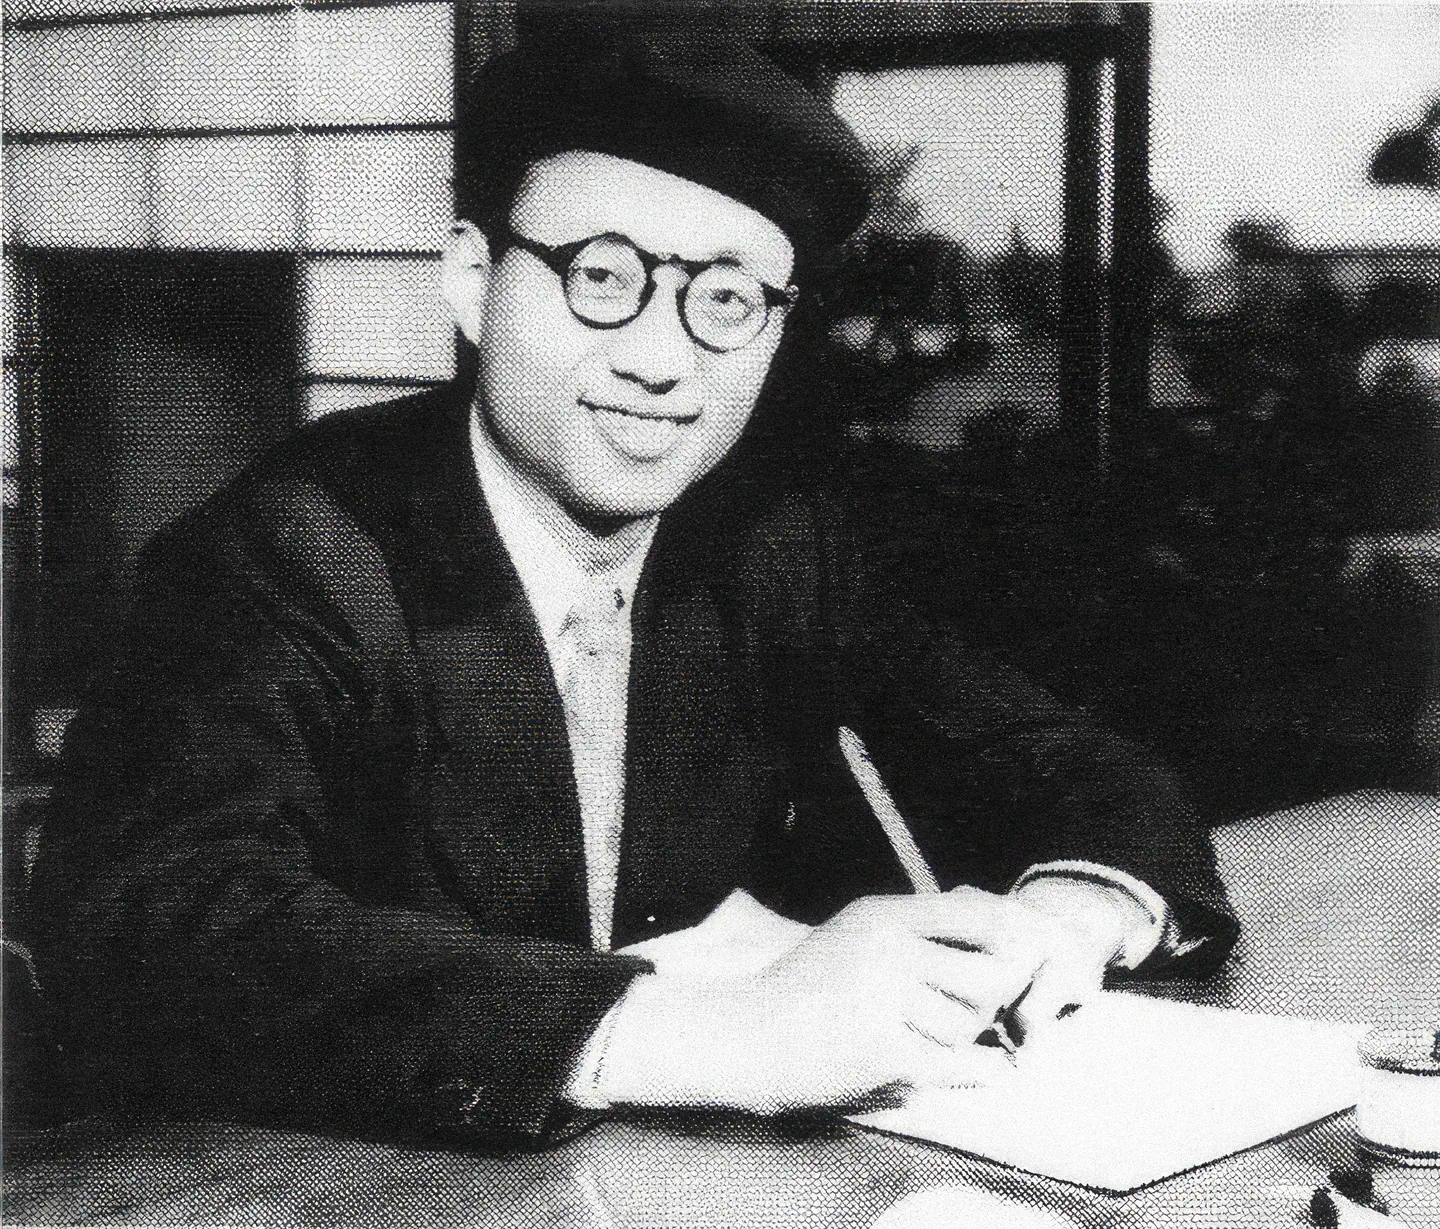 Black and white photo of a smiling man named Osamu Tezuka sitting at a table, wearing a beret and glasses. He is writing on a piece of paper with his right hand, and his left hand appears to be holding another paper or book down on the table.